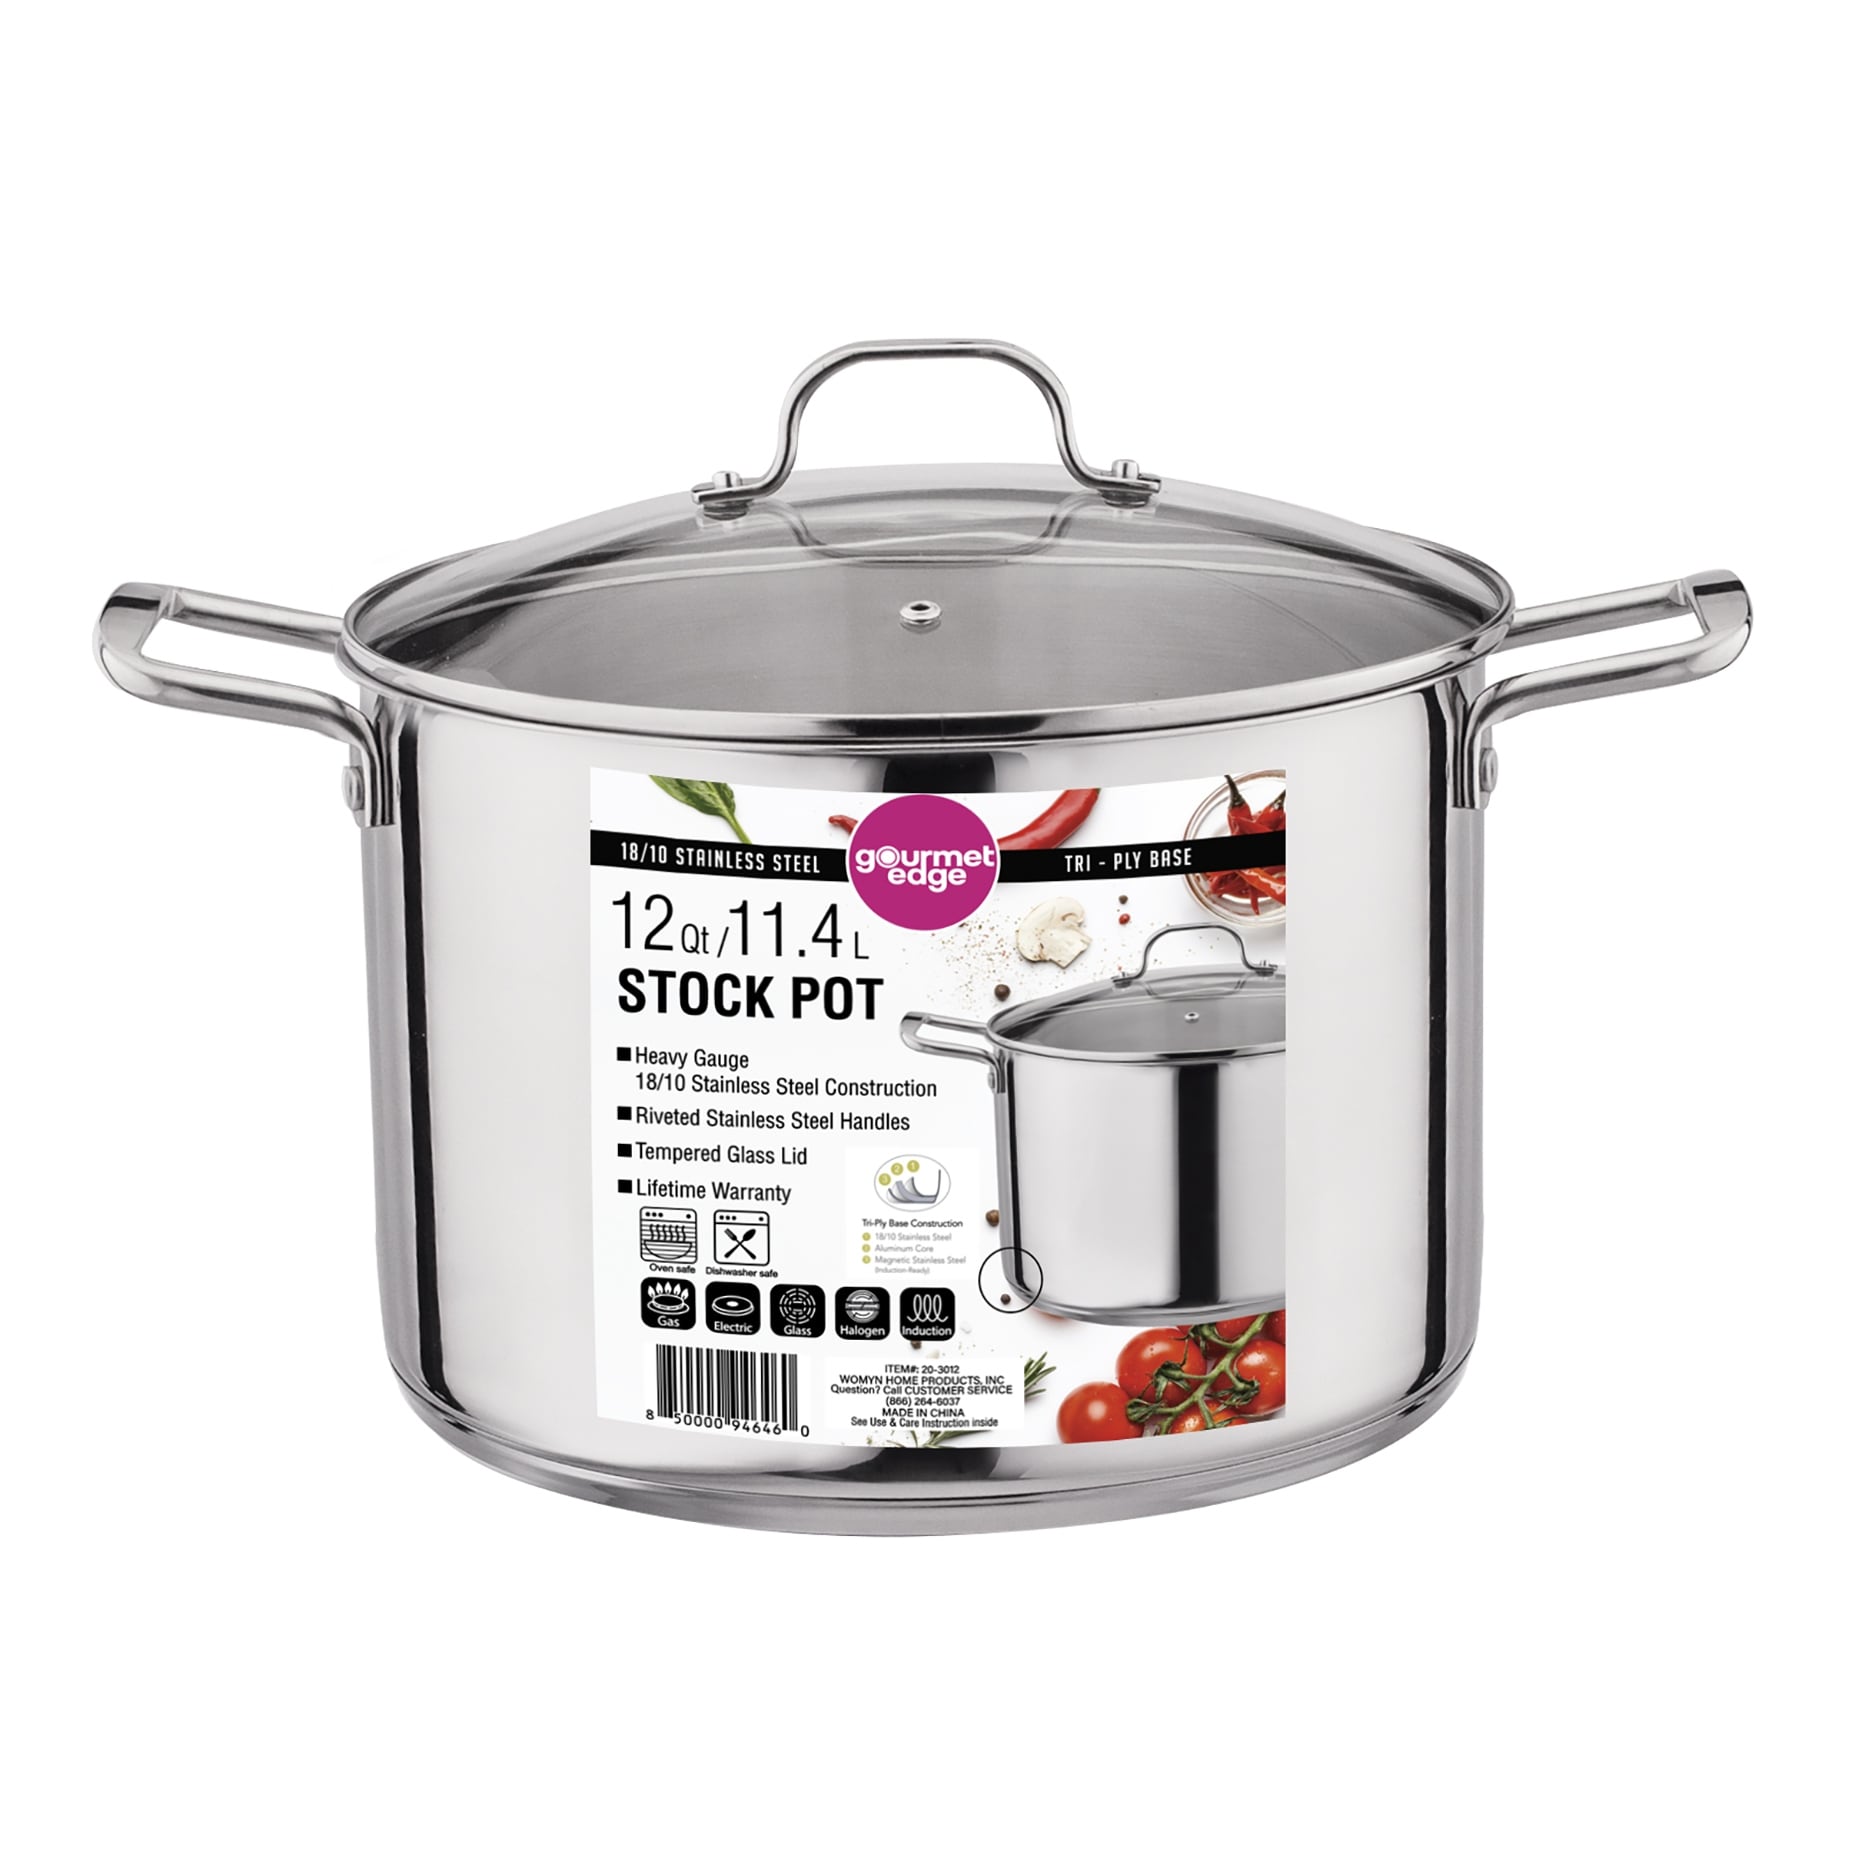 https://ak1.ostkcdn.com/images/products/is/images/direct/81036abe8304bc78f471f3270f0be5e4336c72e8/Gourmet-Edge---12-Qt-18-10-Stainless-Steel-Stock-Pot.jpg